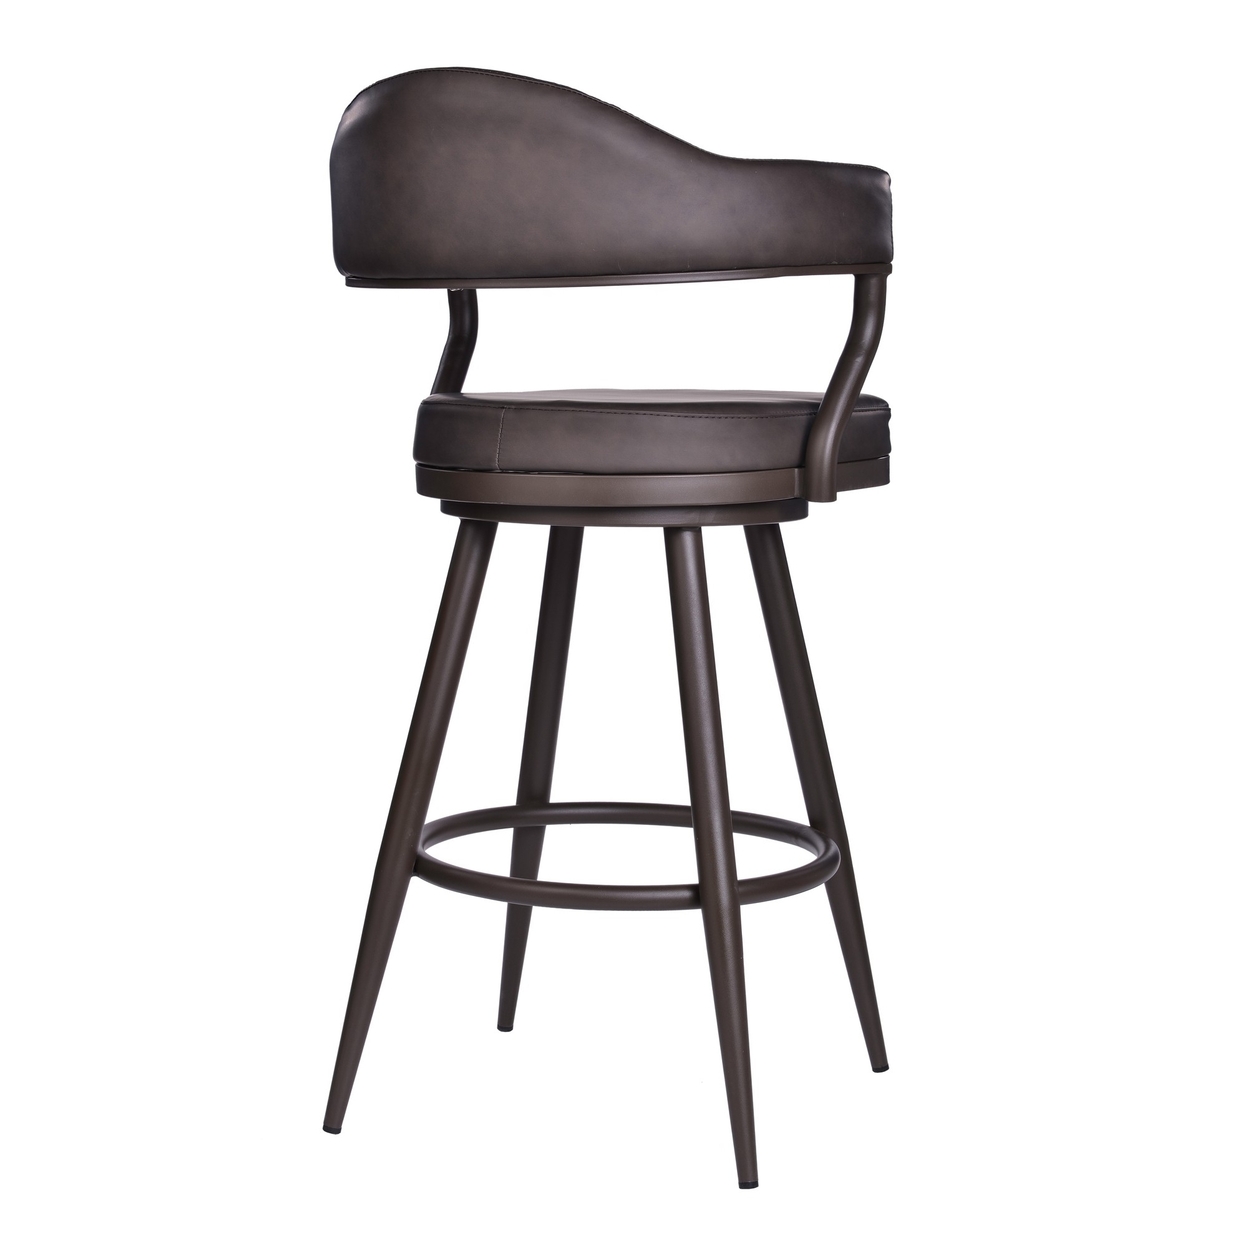 30 Faux Leather Barstool With Open Camelback Design, Brown- Saltoro Sherpi